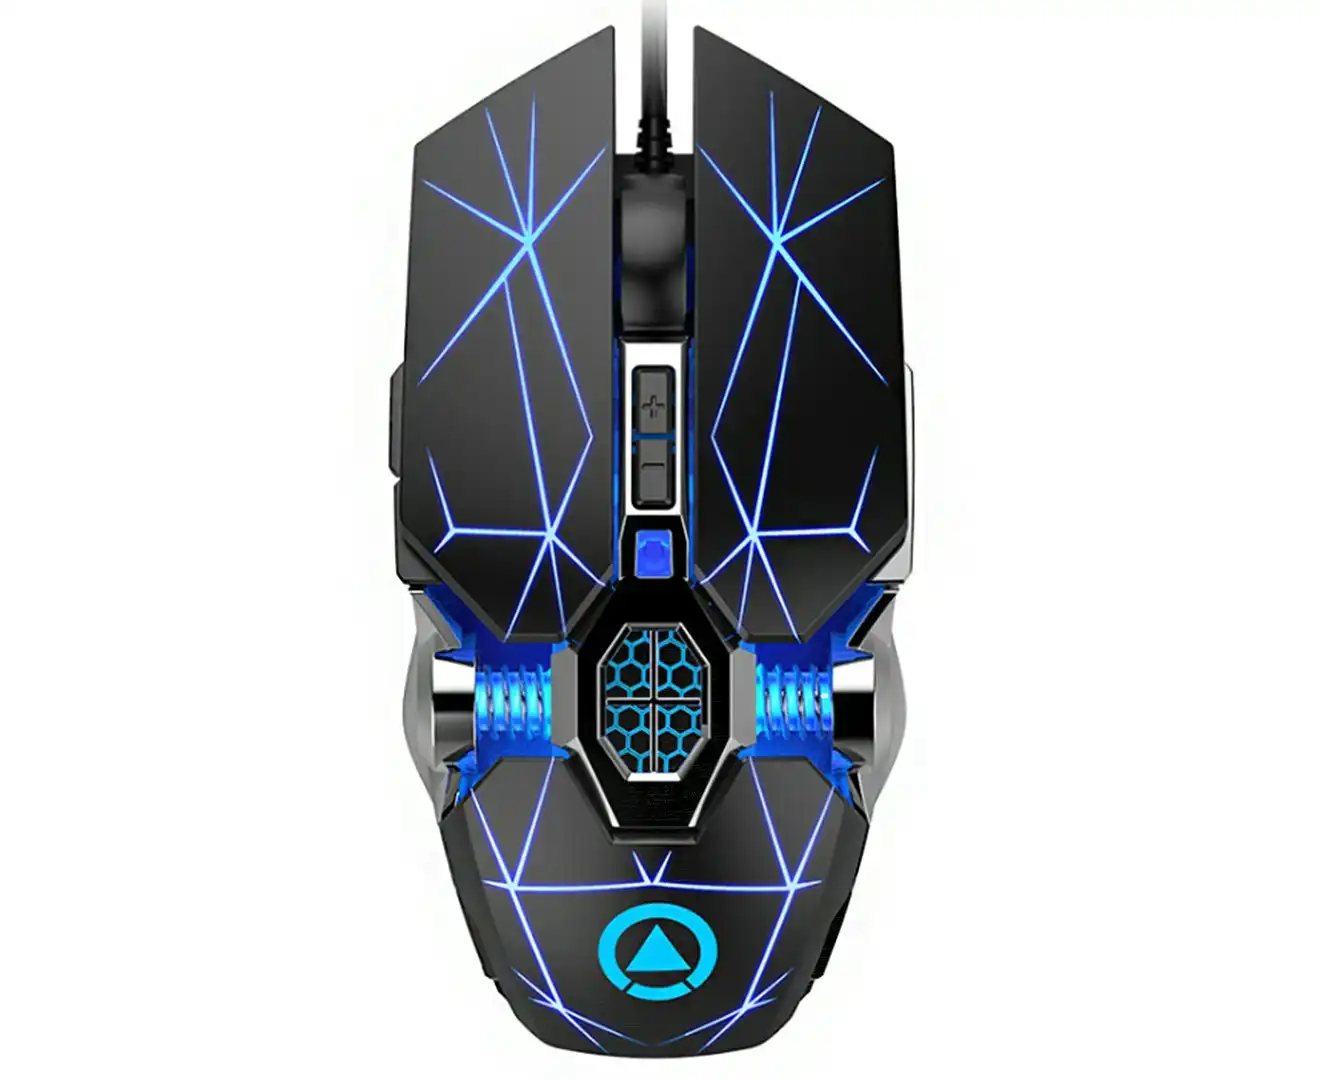 Professional Wired 3200DPI LED Optical USB Gaming Mouse